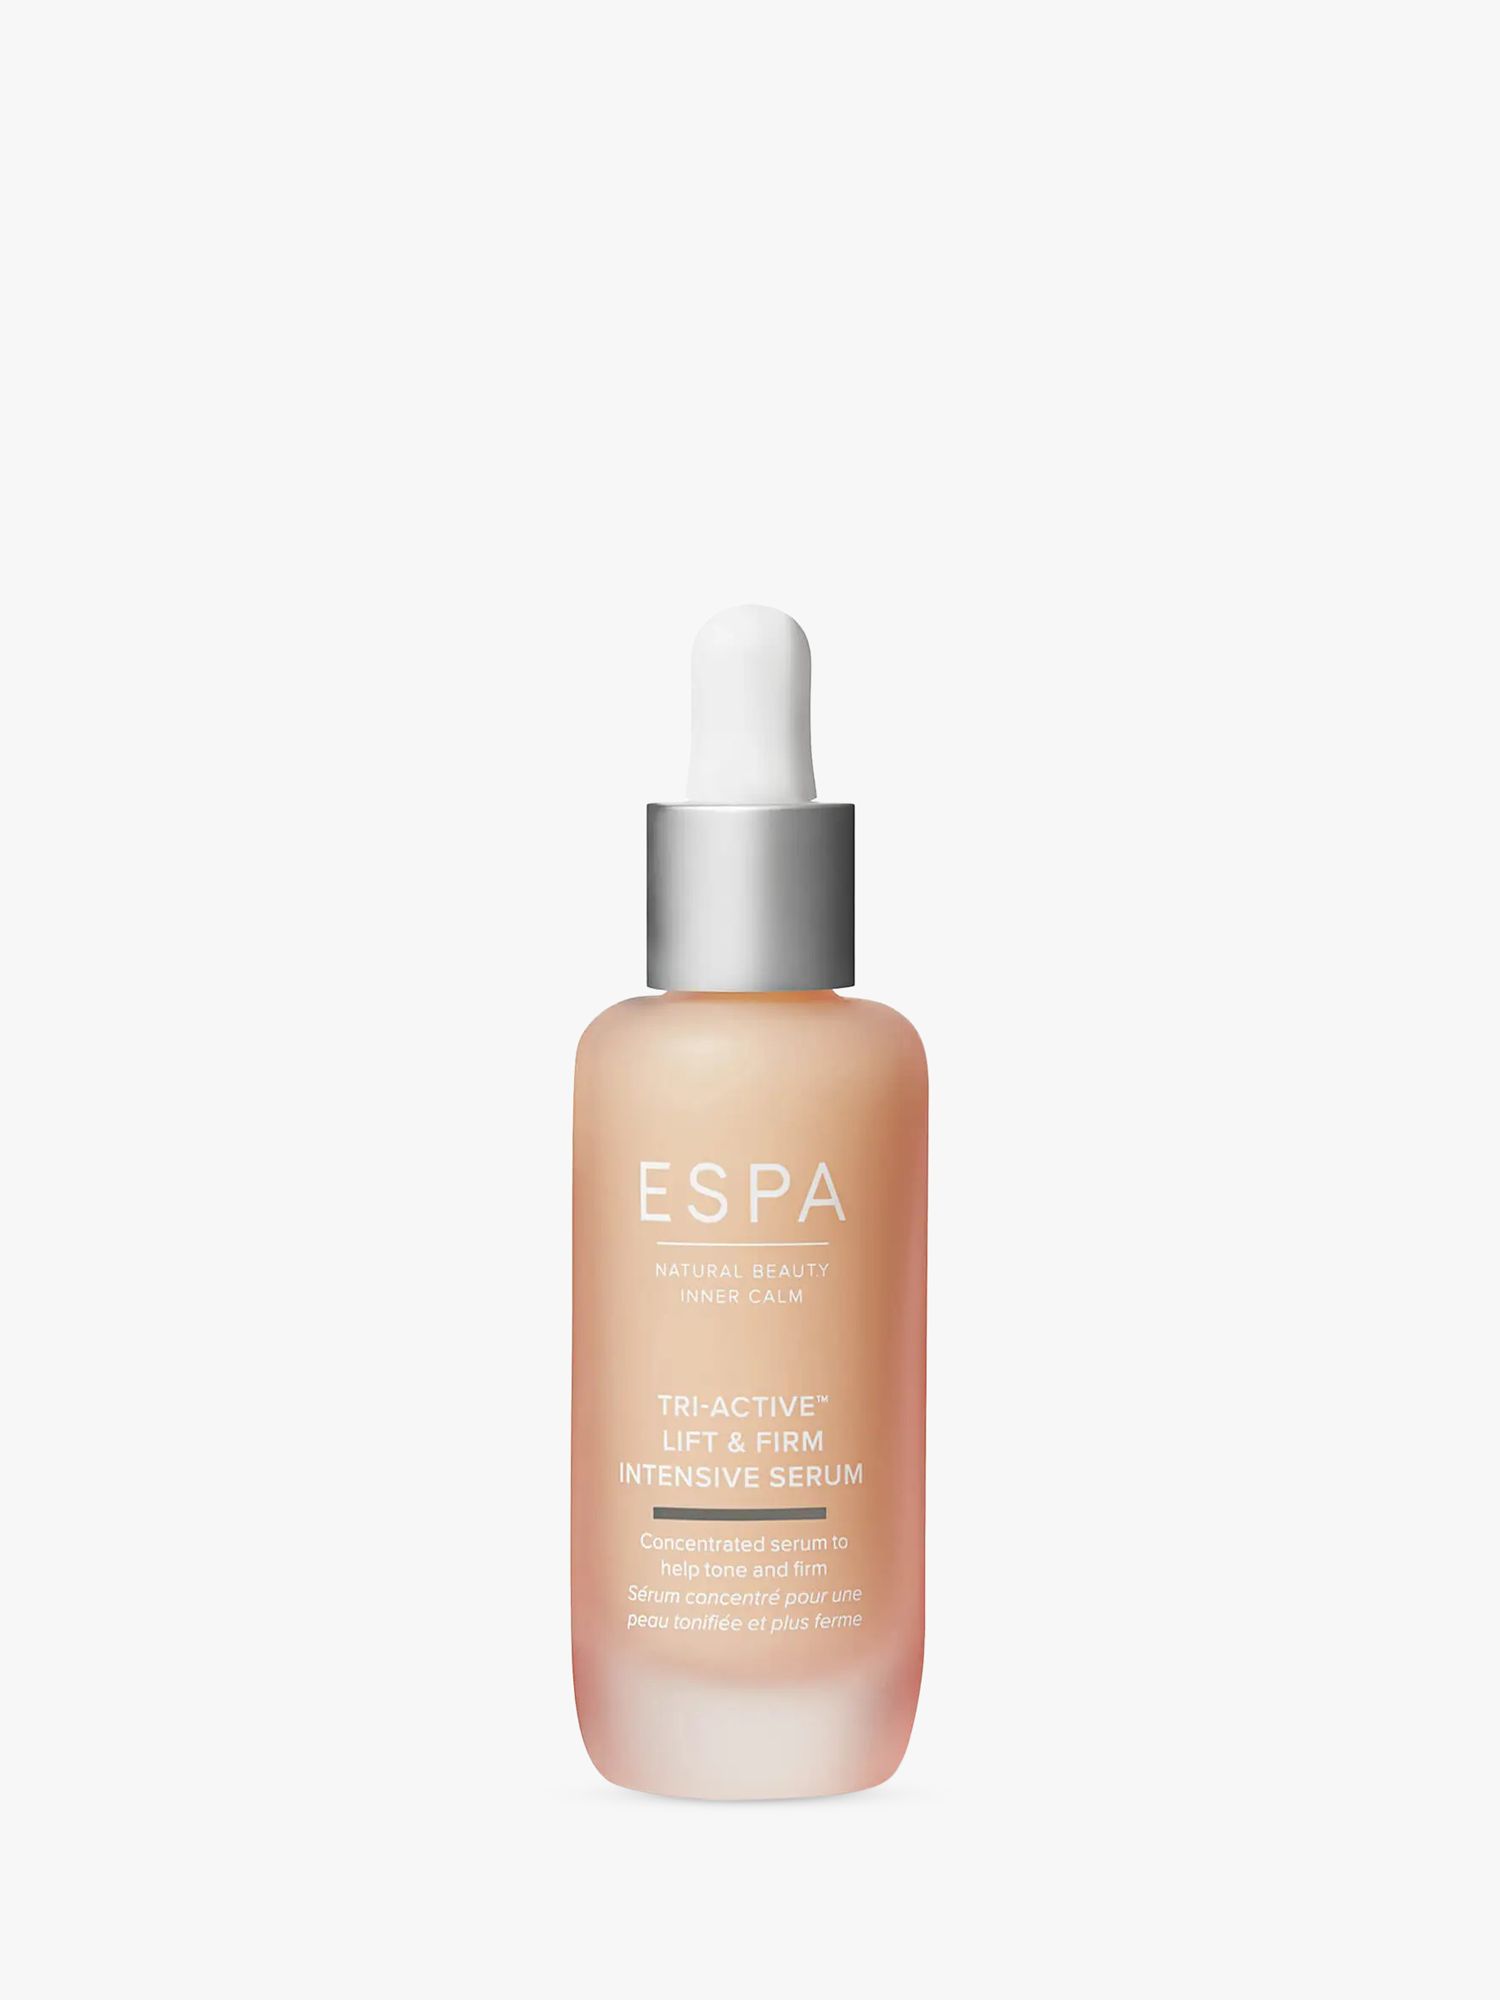 ESPA Tri-Active Lift and Firm Intensive Serum, 30ml 1